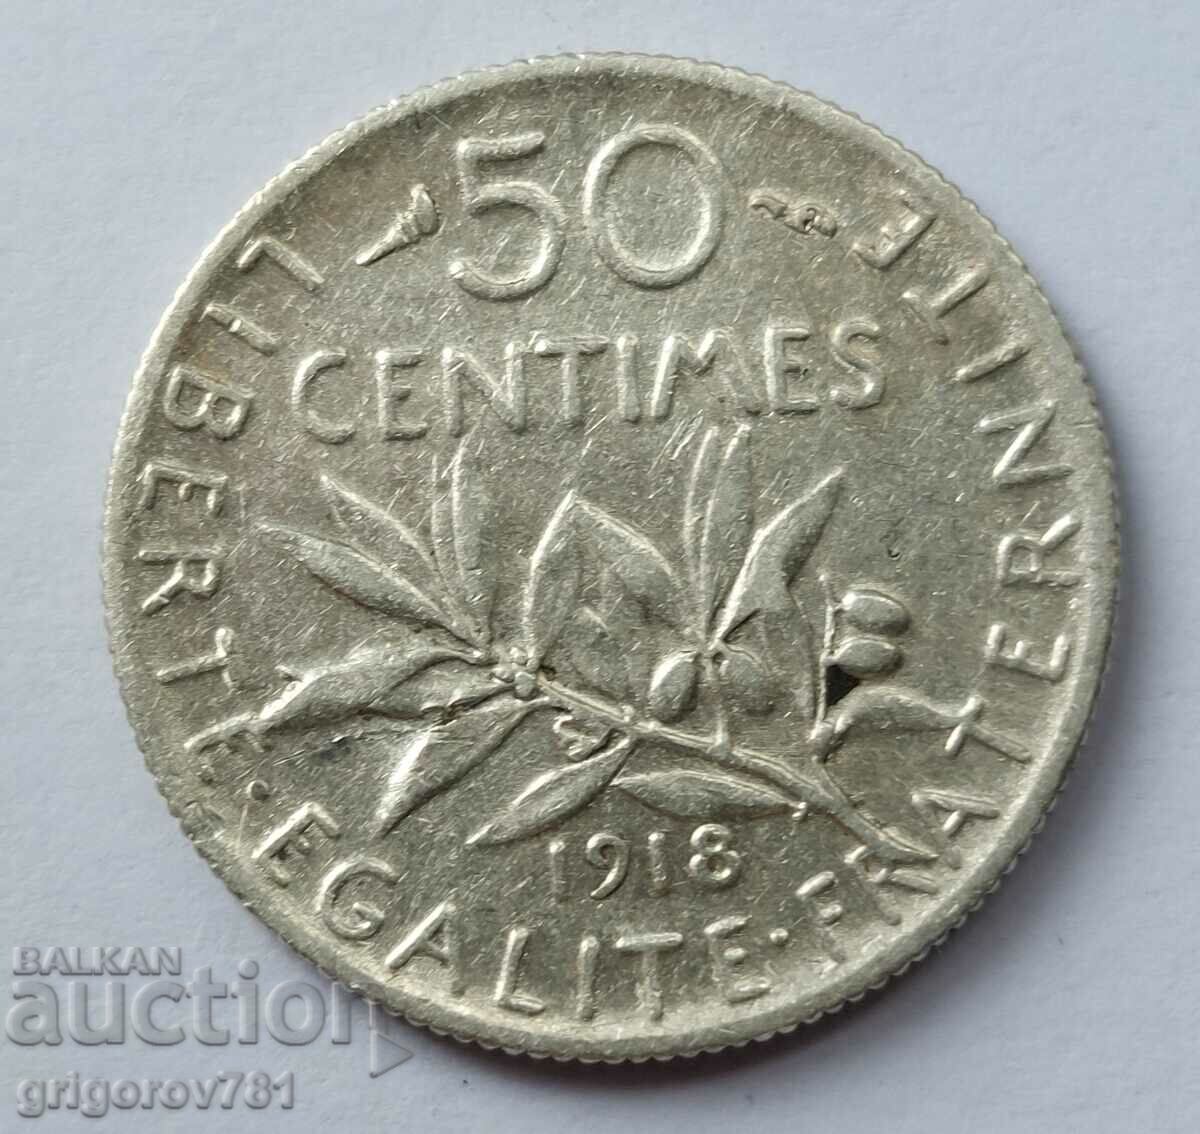 50 centimes silver France 1918 - silver coin №65